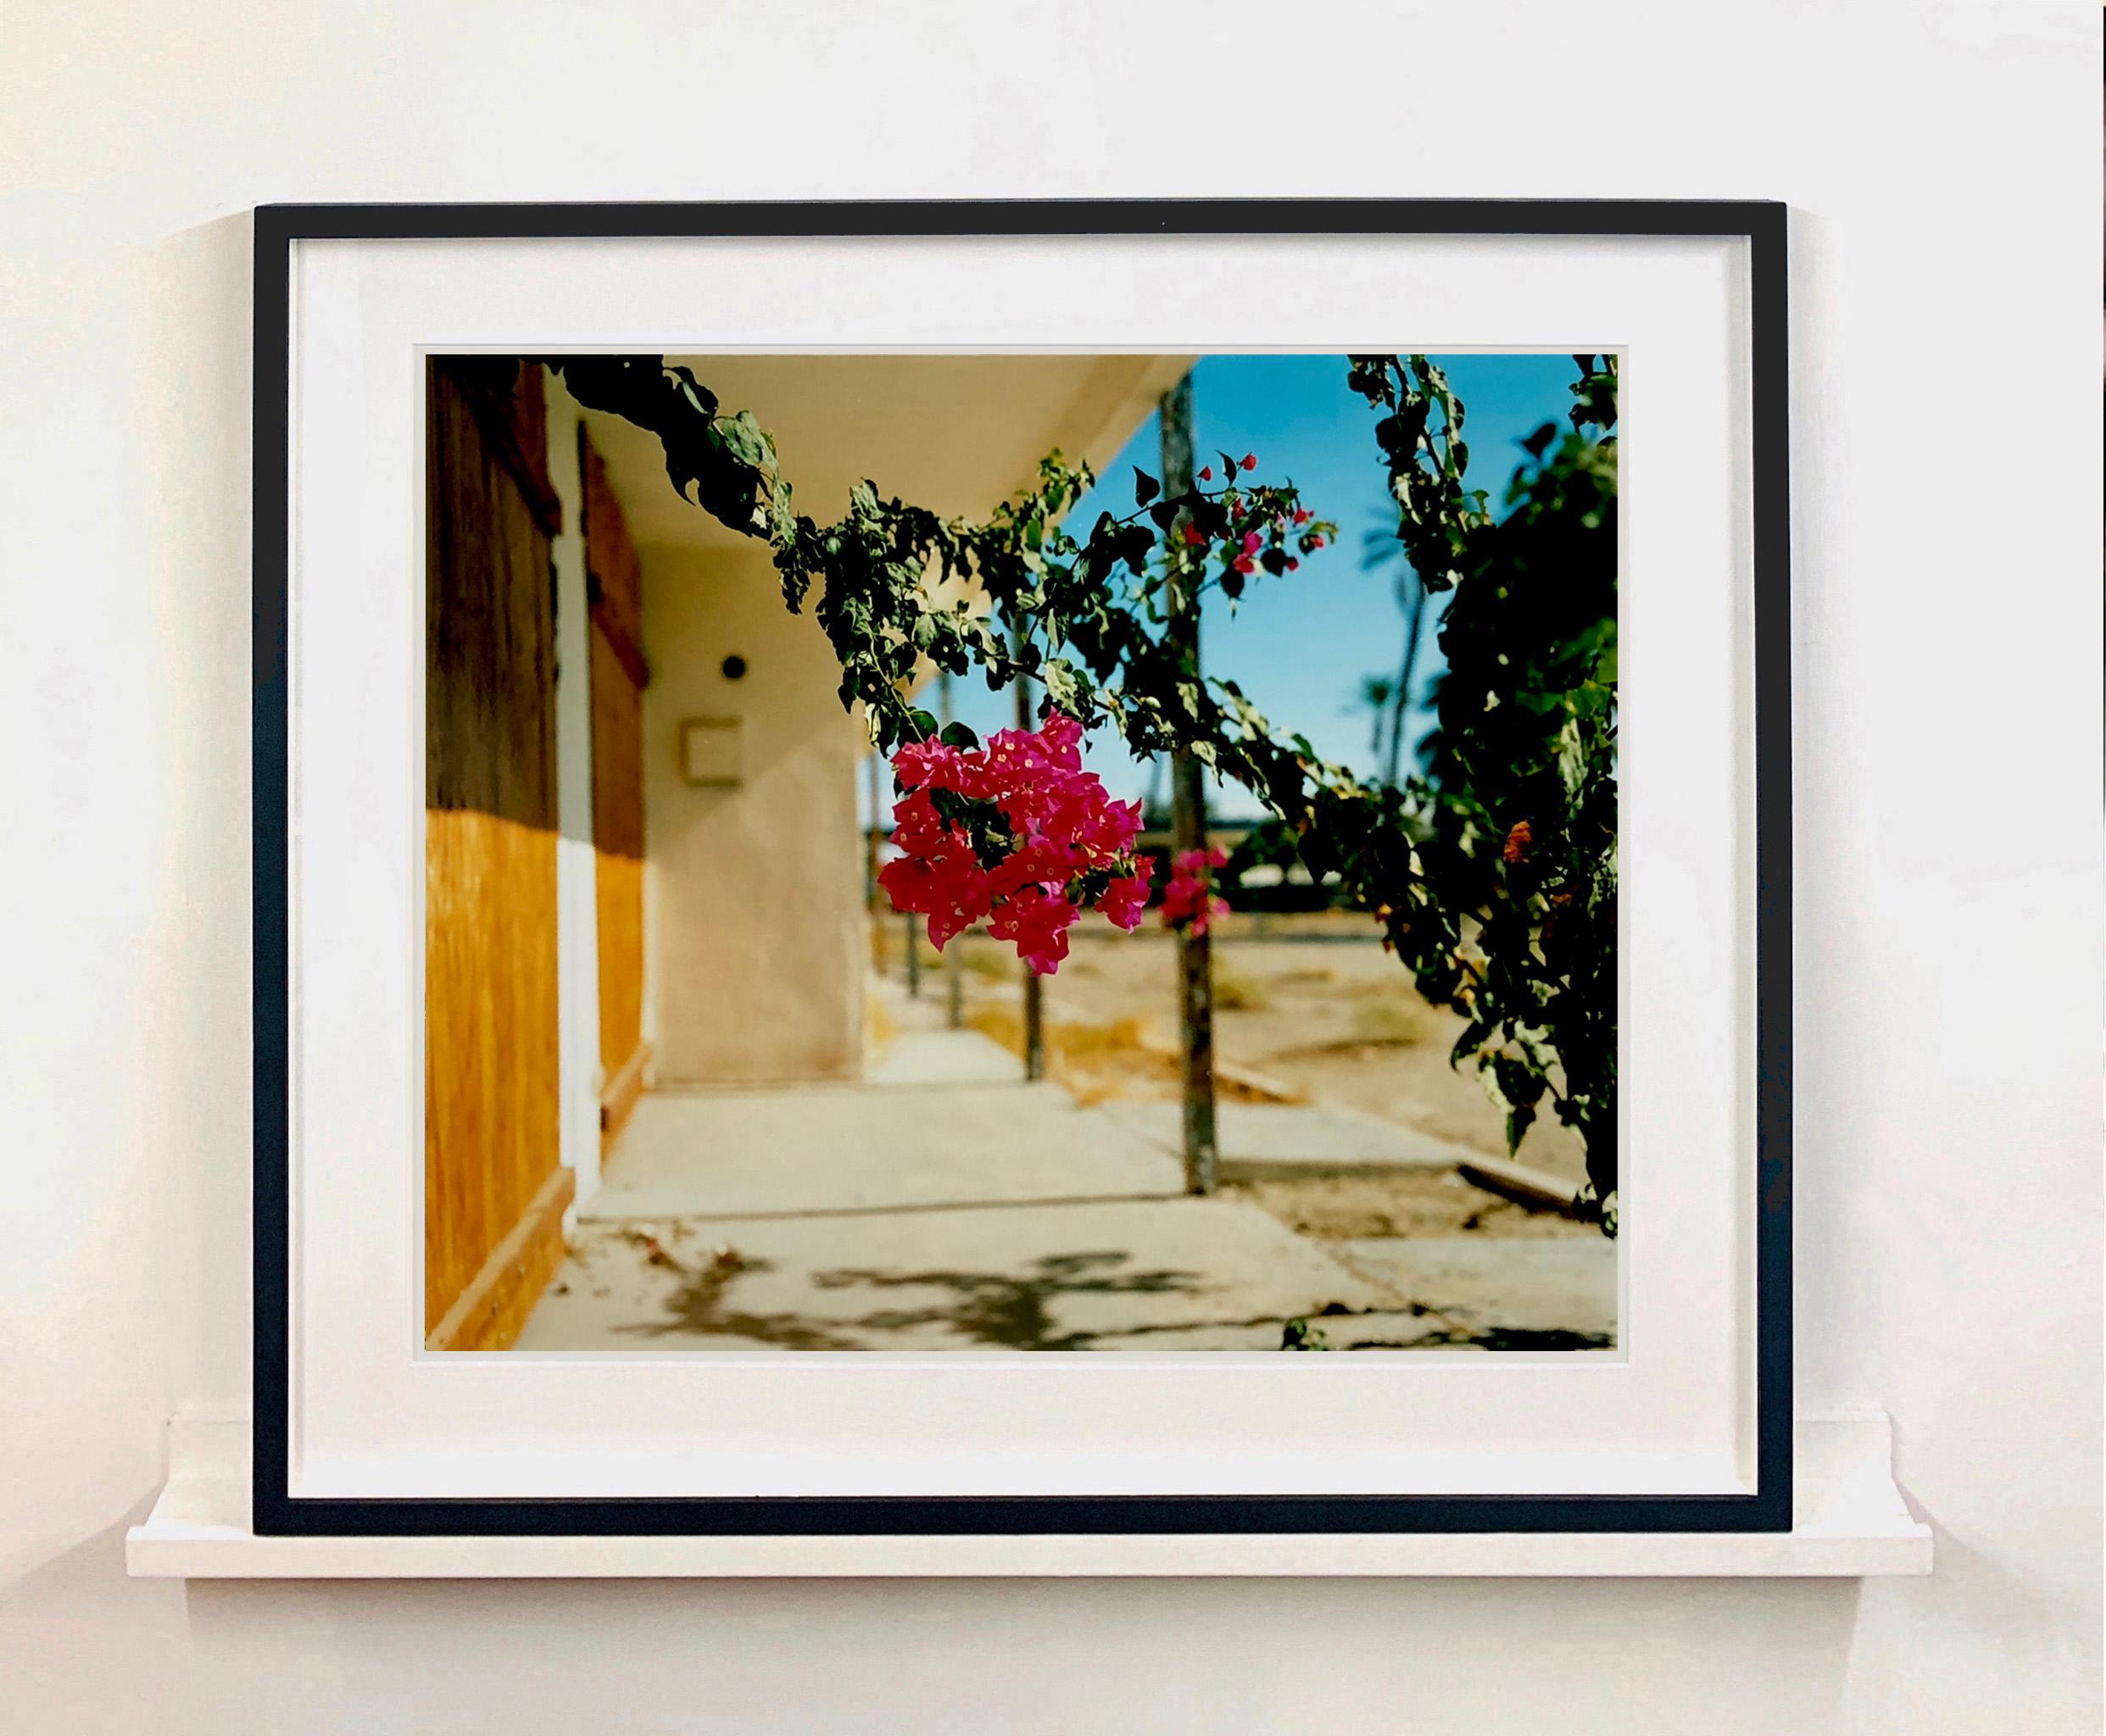 Bougainvillea, North Shore Motel. Floral print photograph from Richard Heeps Salton Sea series.

This artwork is a limited edition of 25, gloss photographic print only. It will be delivered rolled in a box accompanied by a signed and numbered